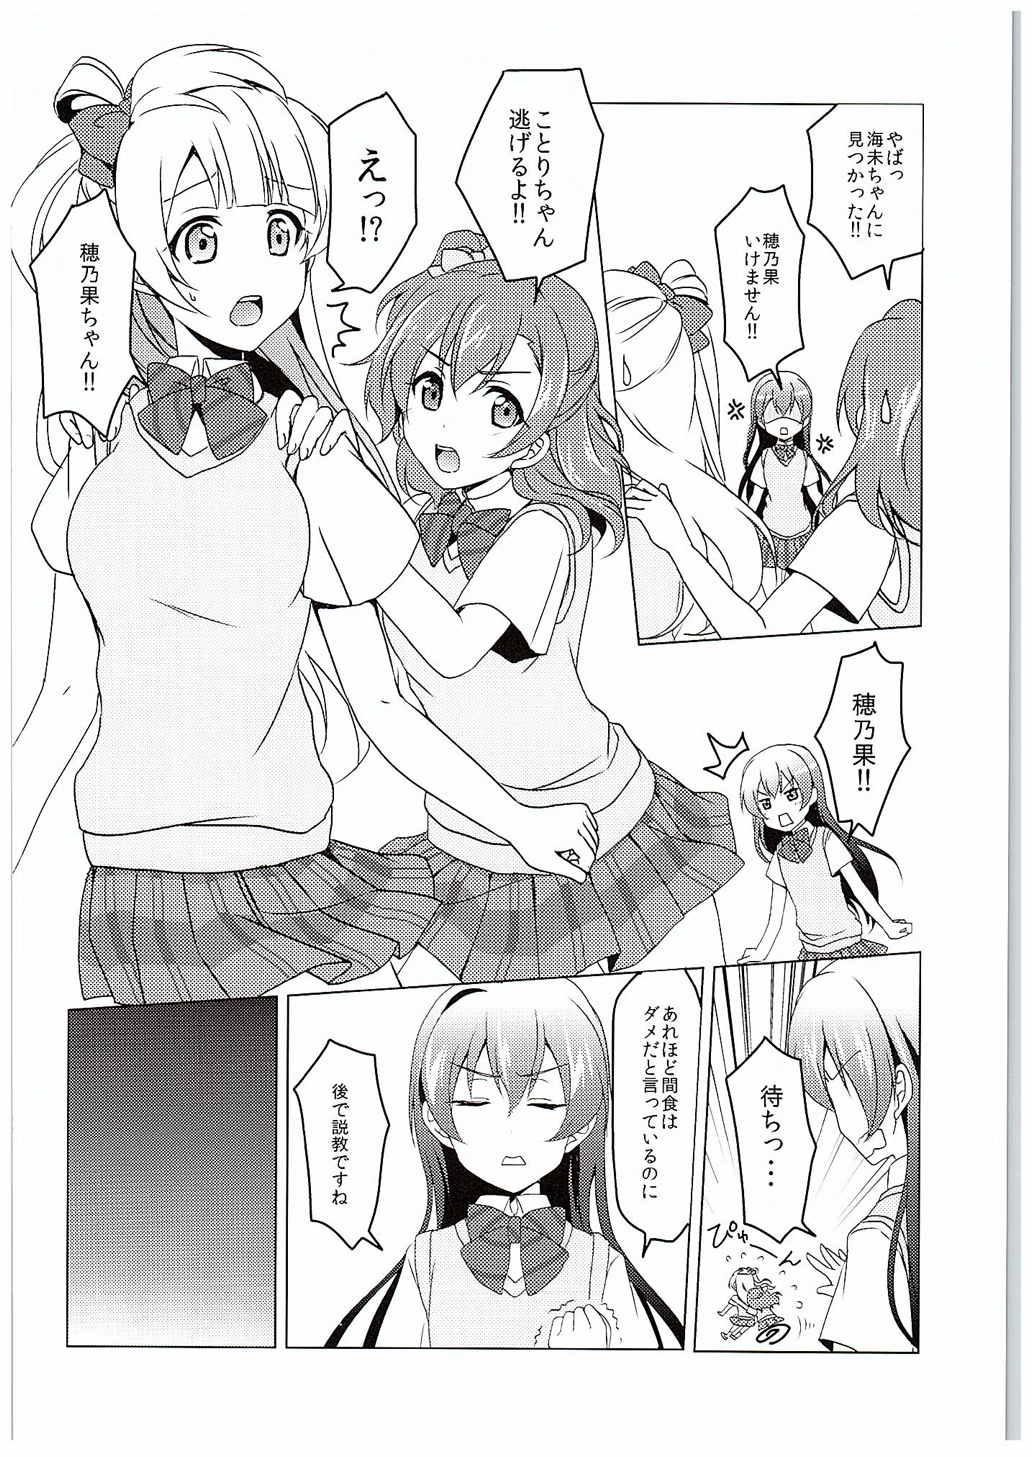 Face Sitting µ'2 ←Counterattack - Love live 18 Year Old Porn - Page 5